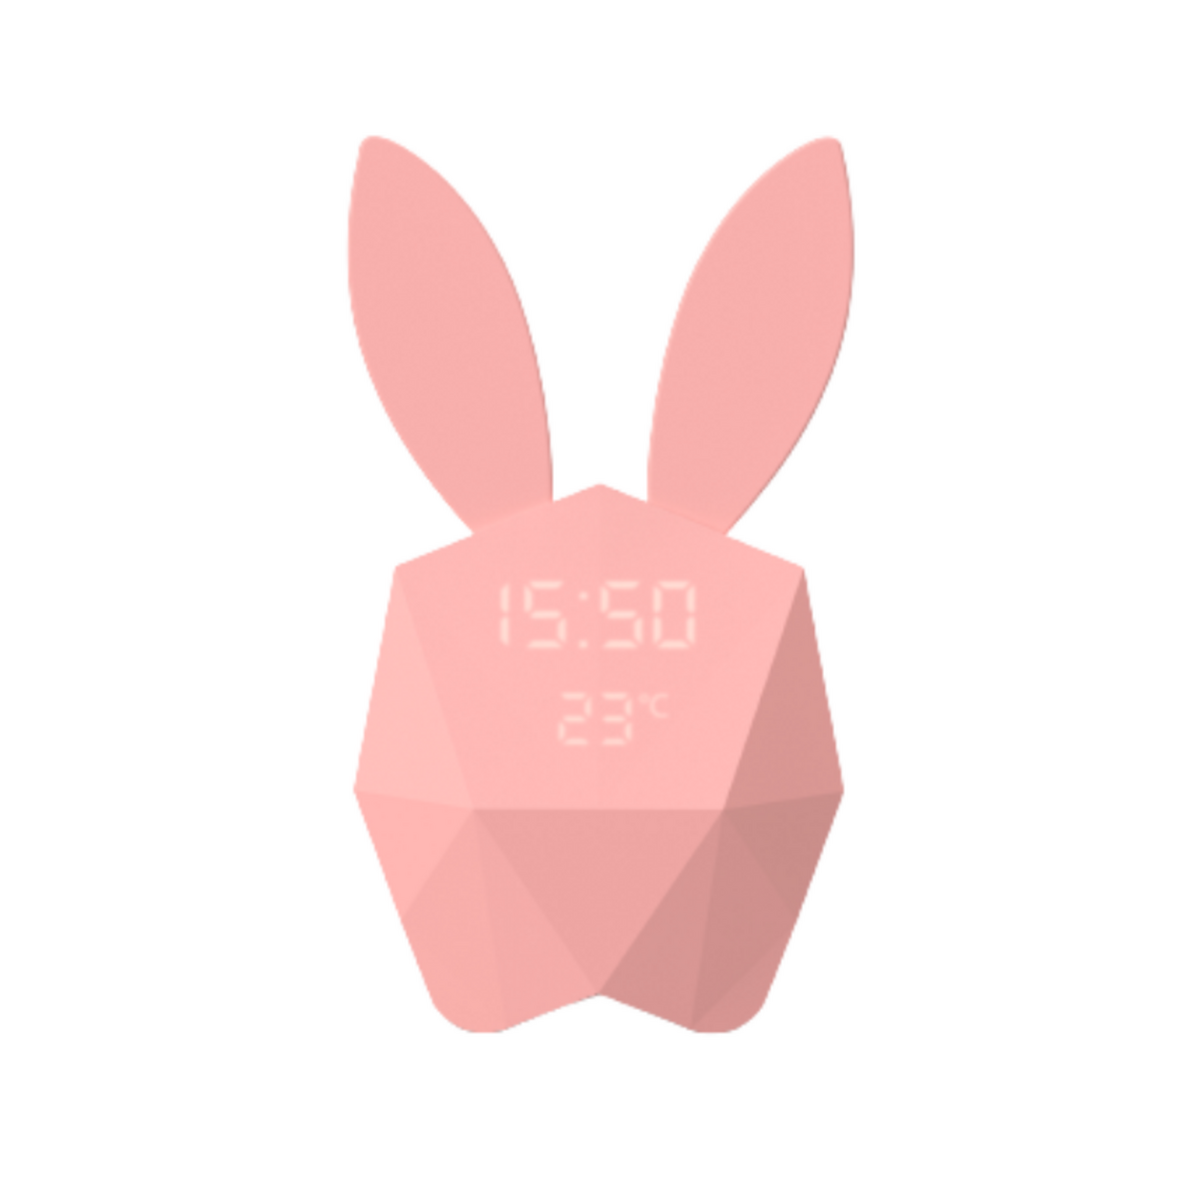 MOBILITY ON BOARD Réveil Lapin Intelligent - Mobility on Board - Cutie  Clock - Rose Pastel pas cher 